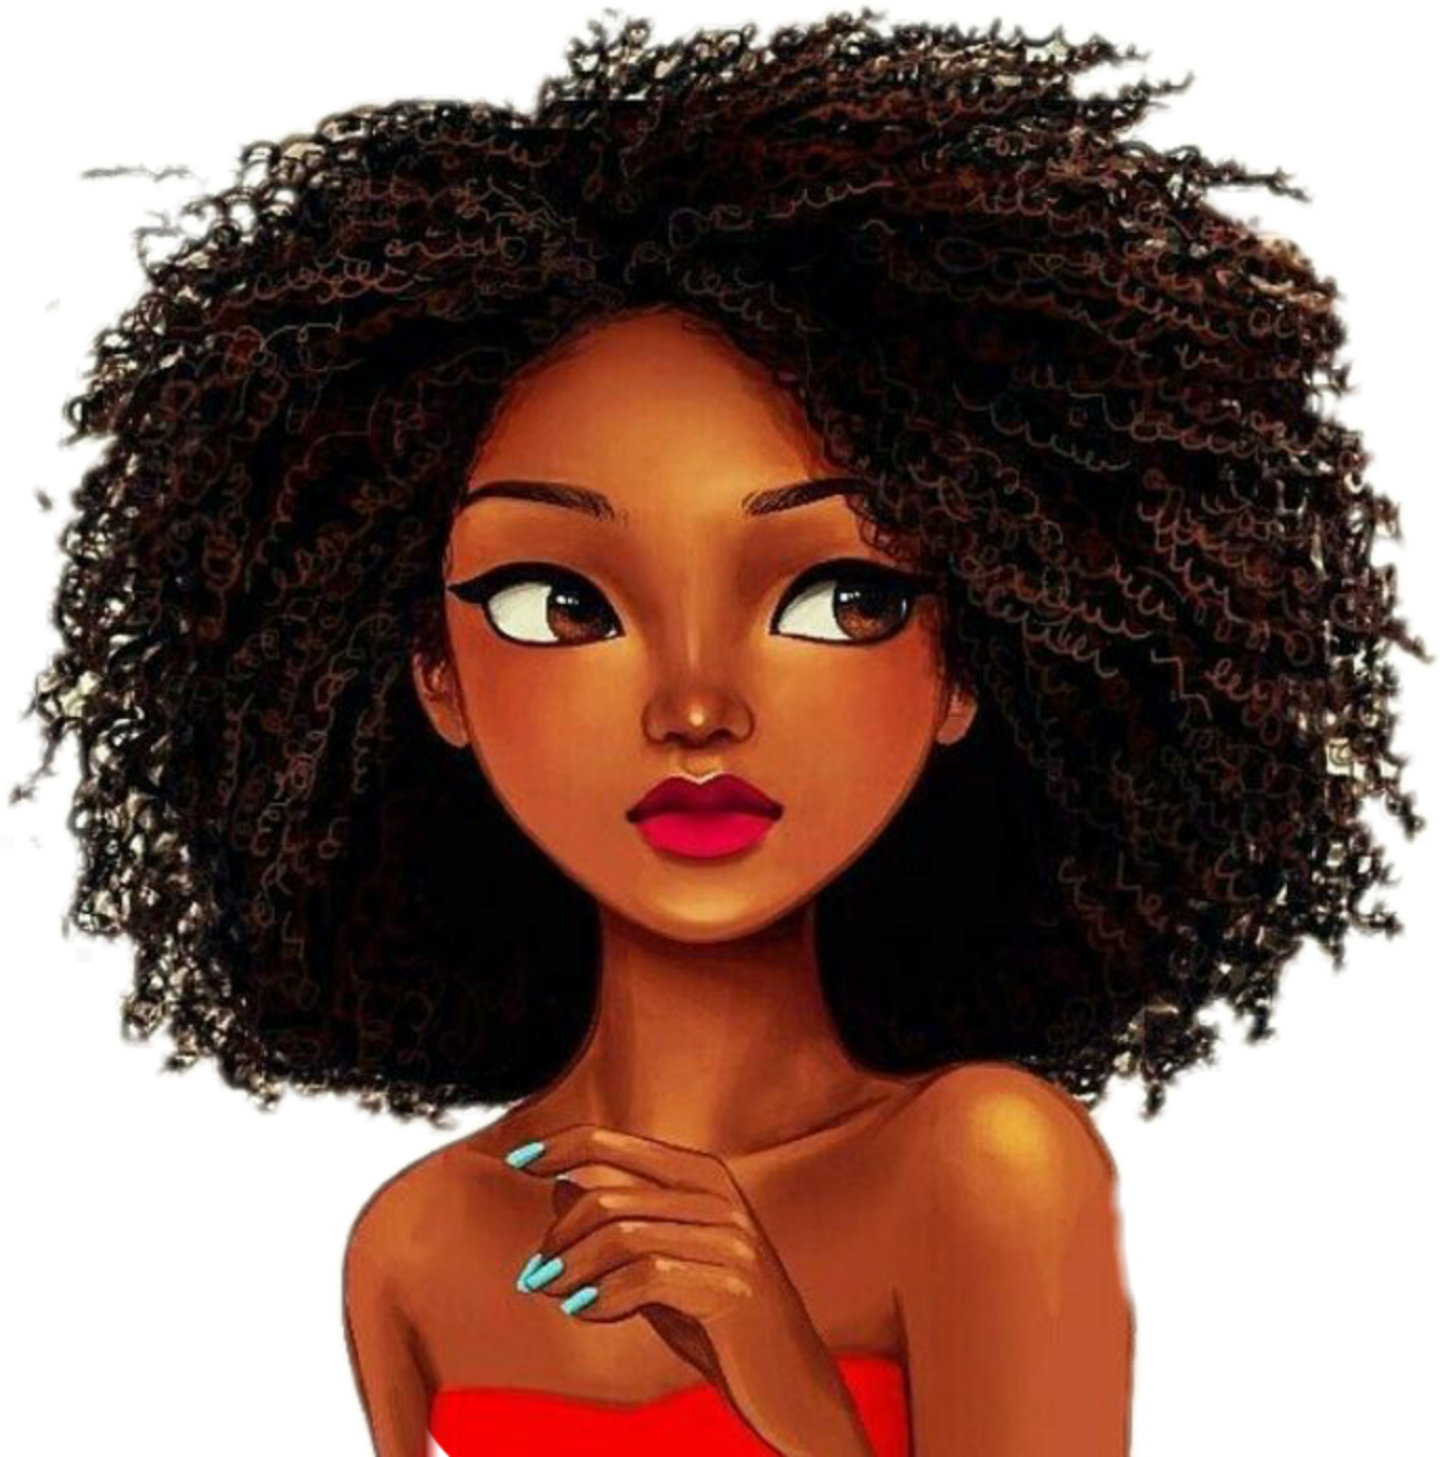 afro freetoedit #afro 302277155134211 by @nicquerobinson.